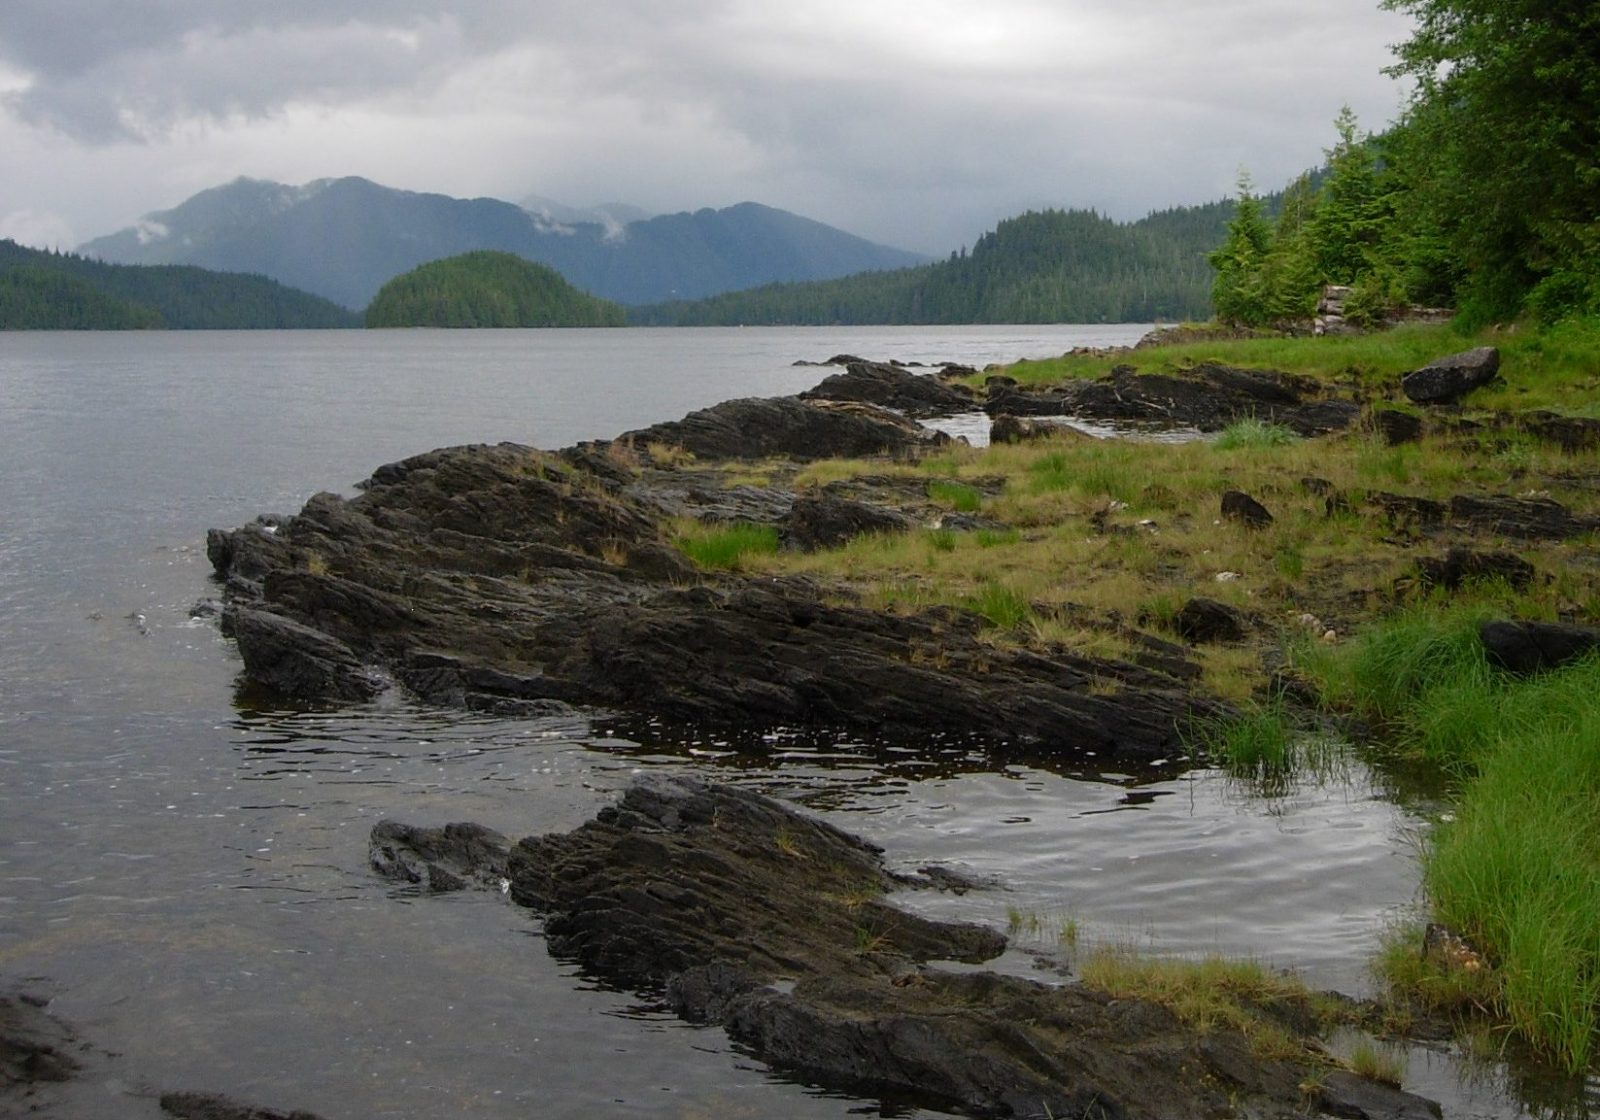 Eleven Alaska Native tribes offer new way forward on managing the Tongass